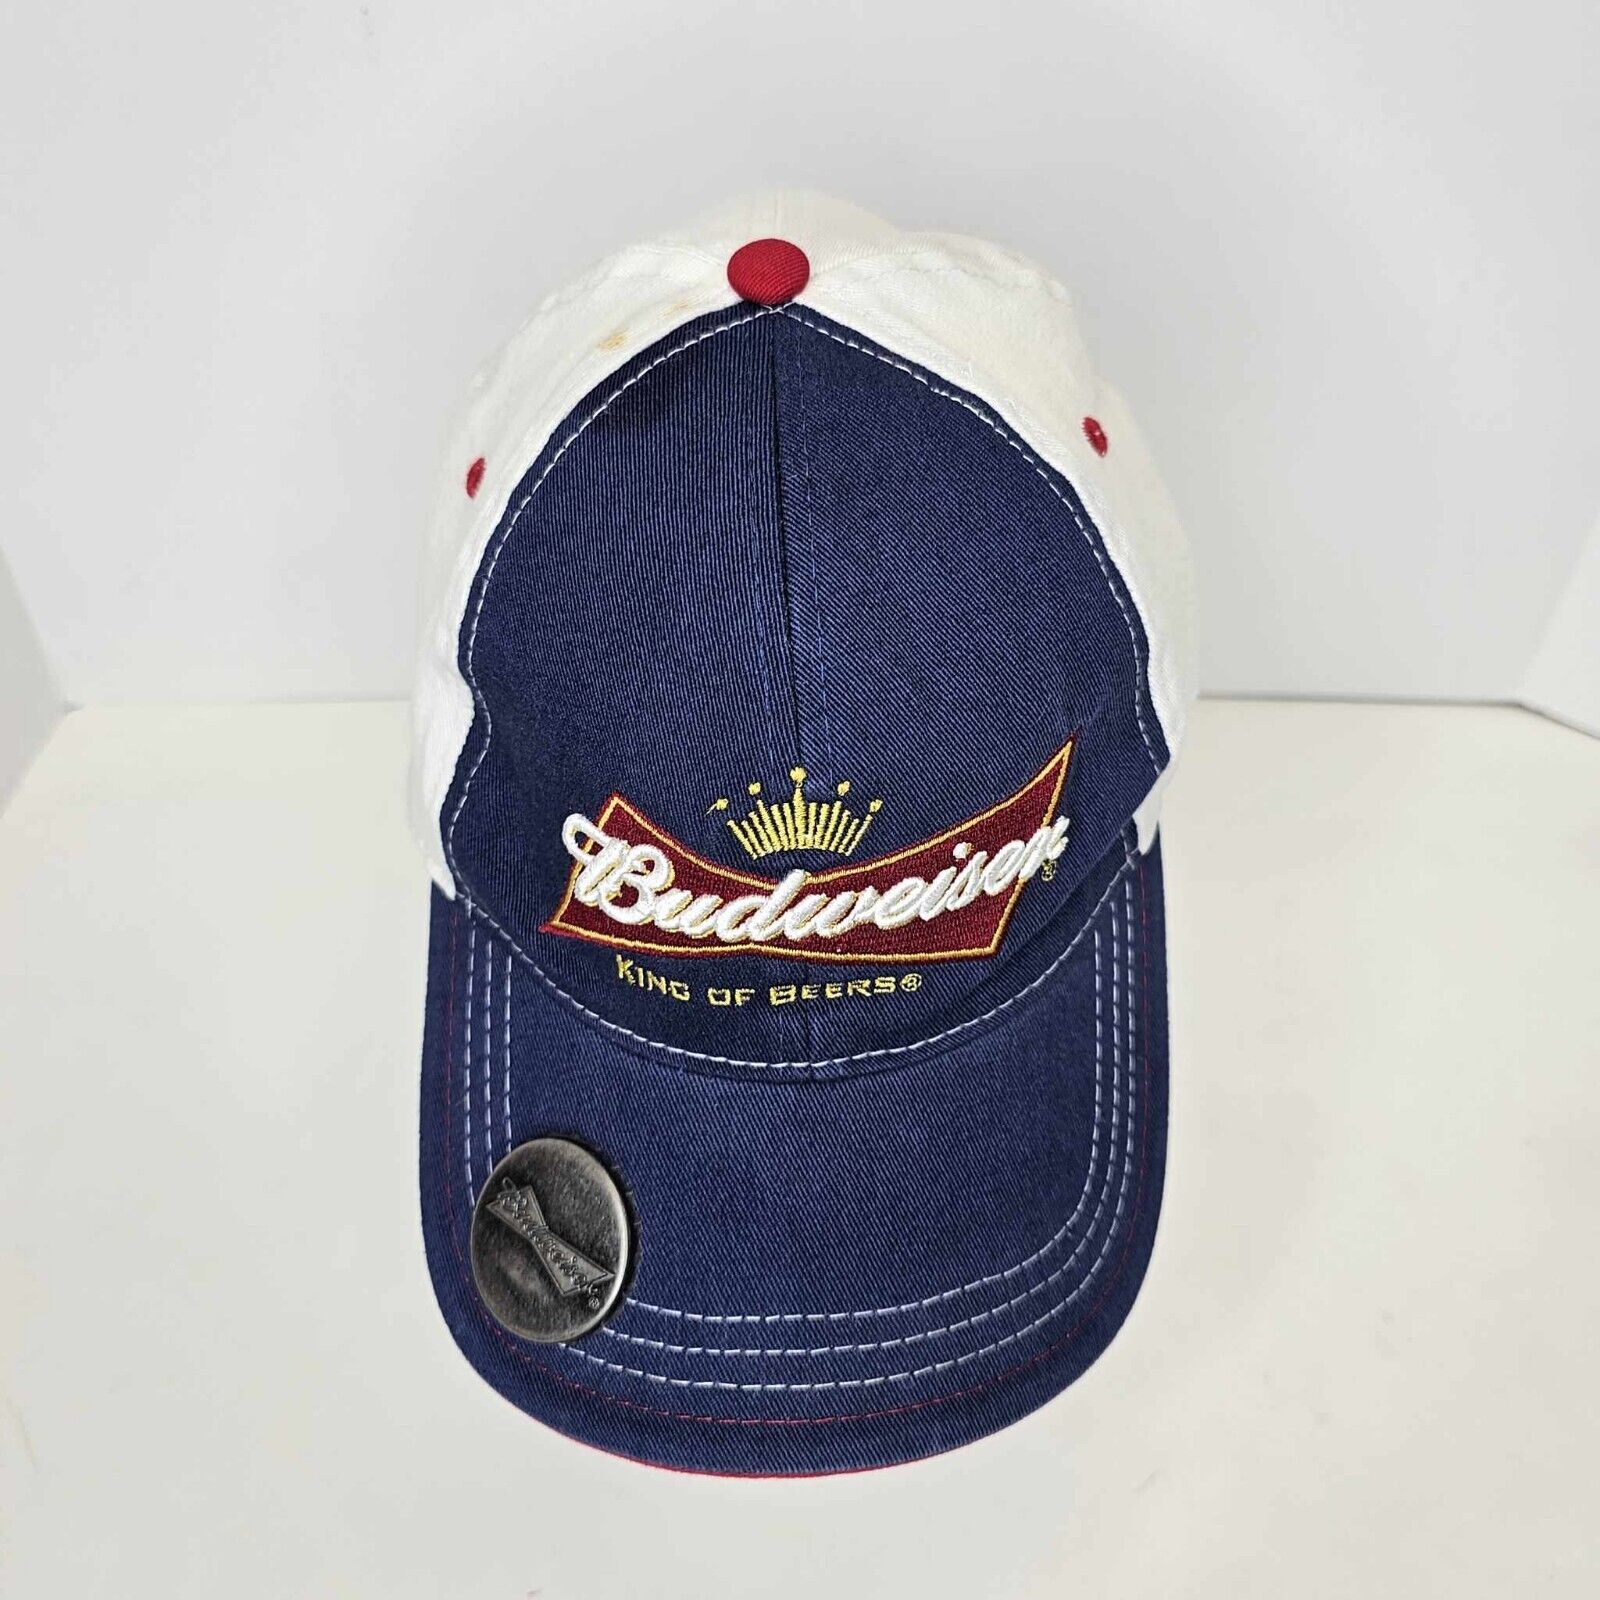 Budweiser King Of Beers Bottle Cap Opener Denim And White Fitted Adult Hat Cap